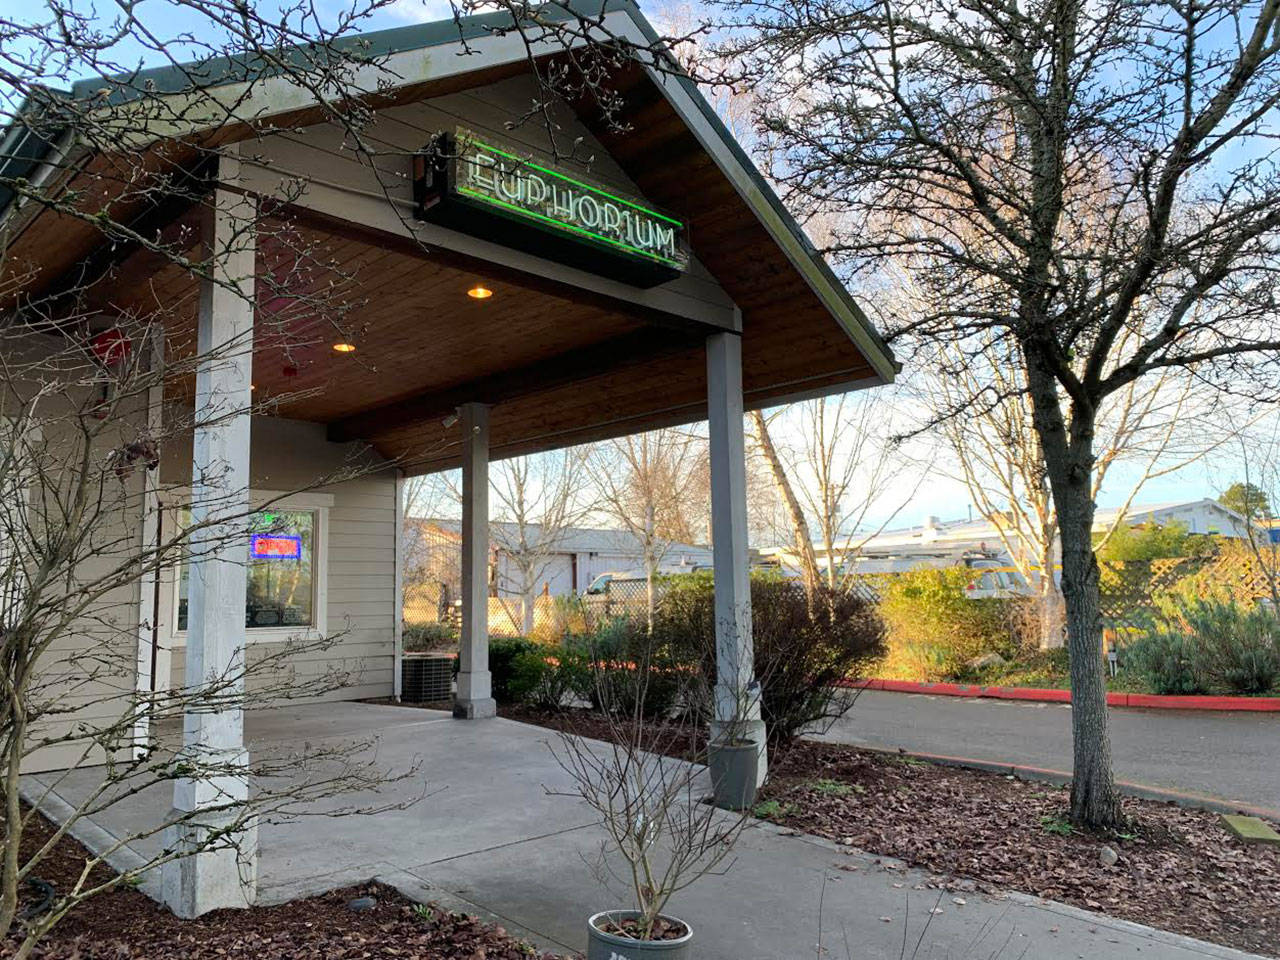 The Euphorium on Vashon Highway was robbed on Saturday night. (Kevin Opsahl/Staff Photo)